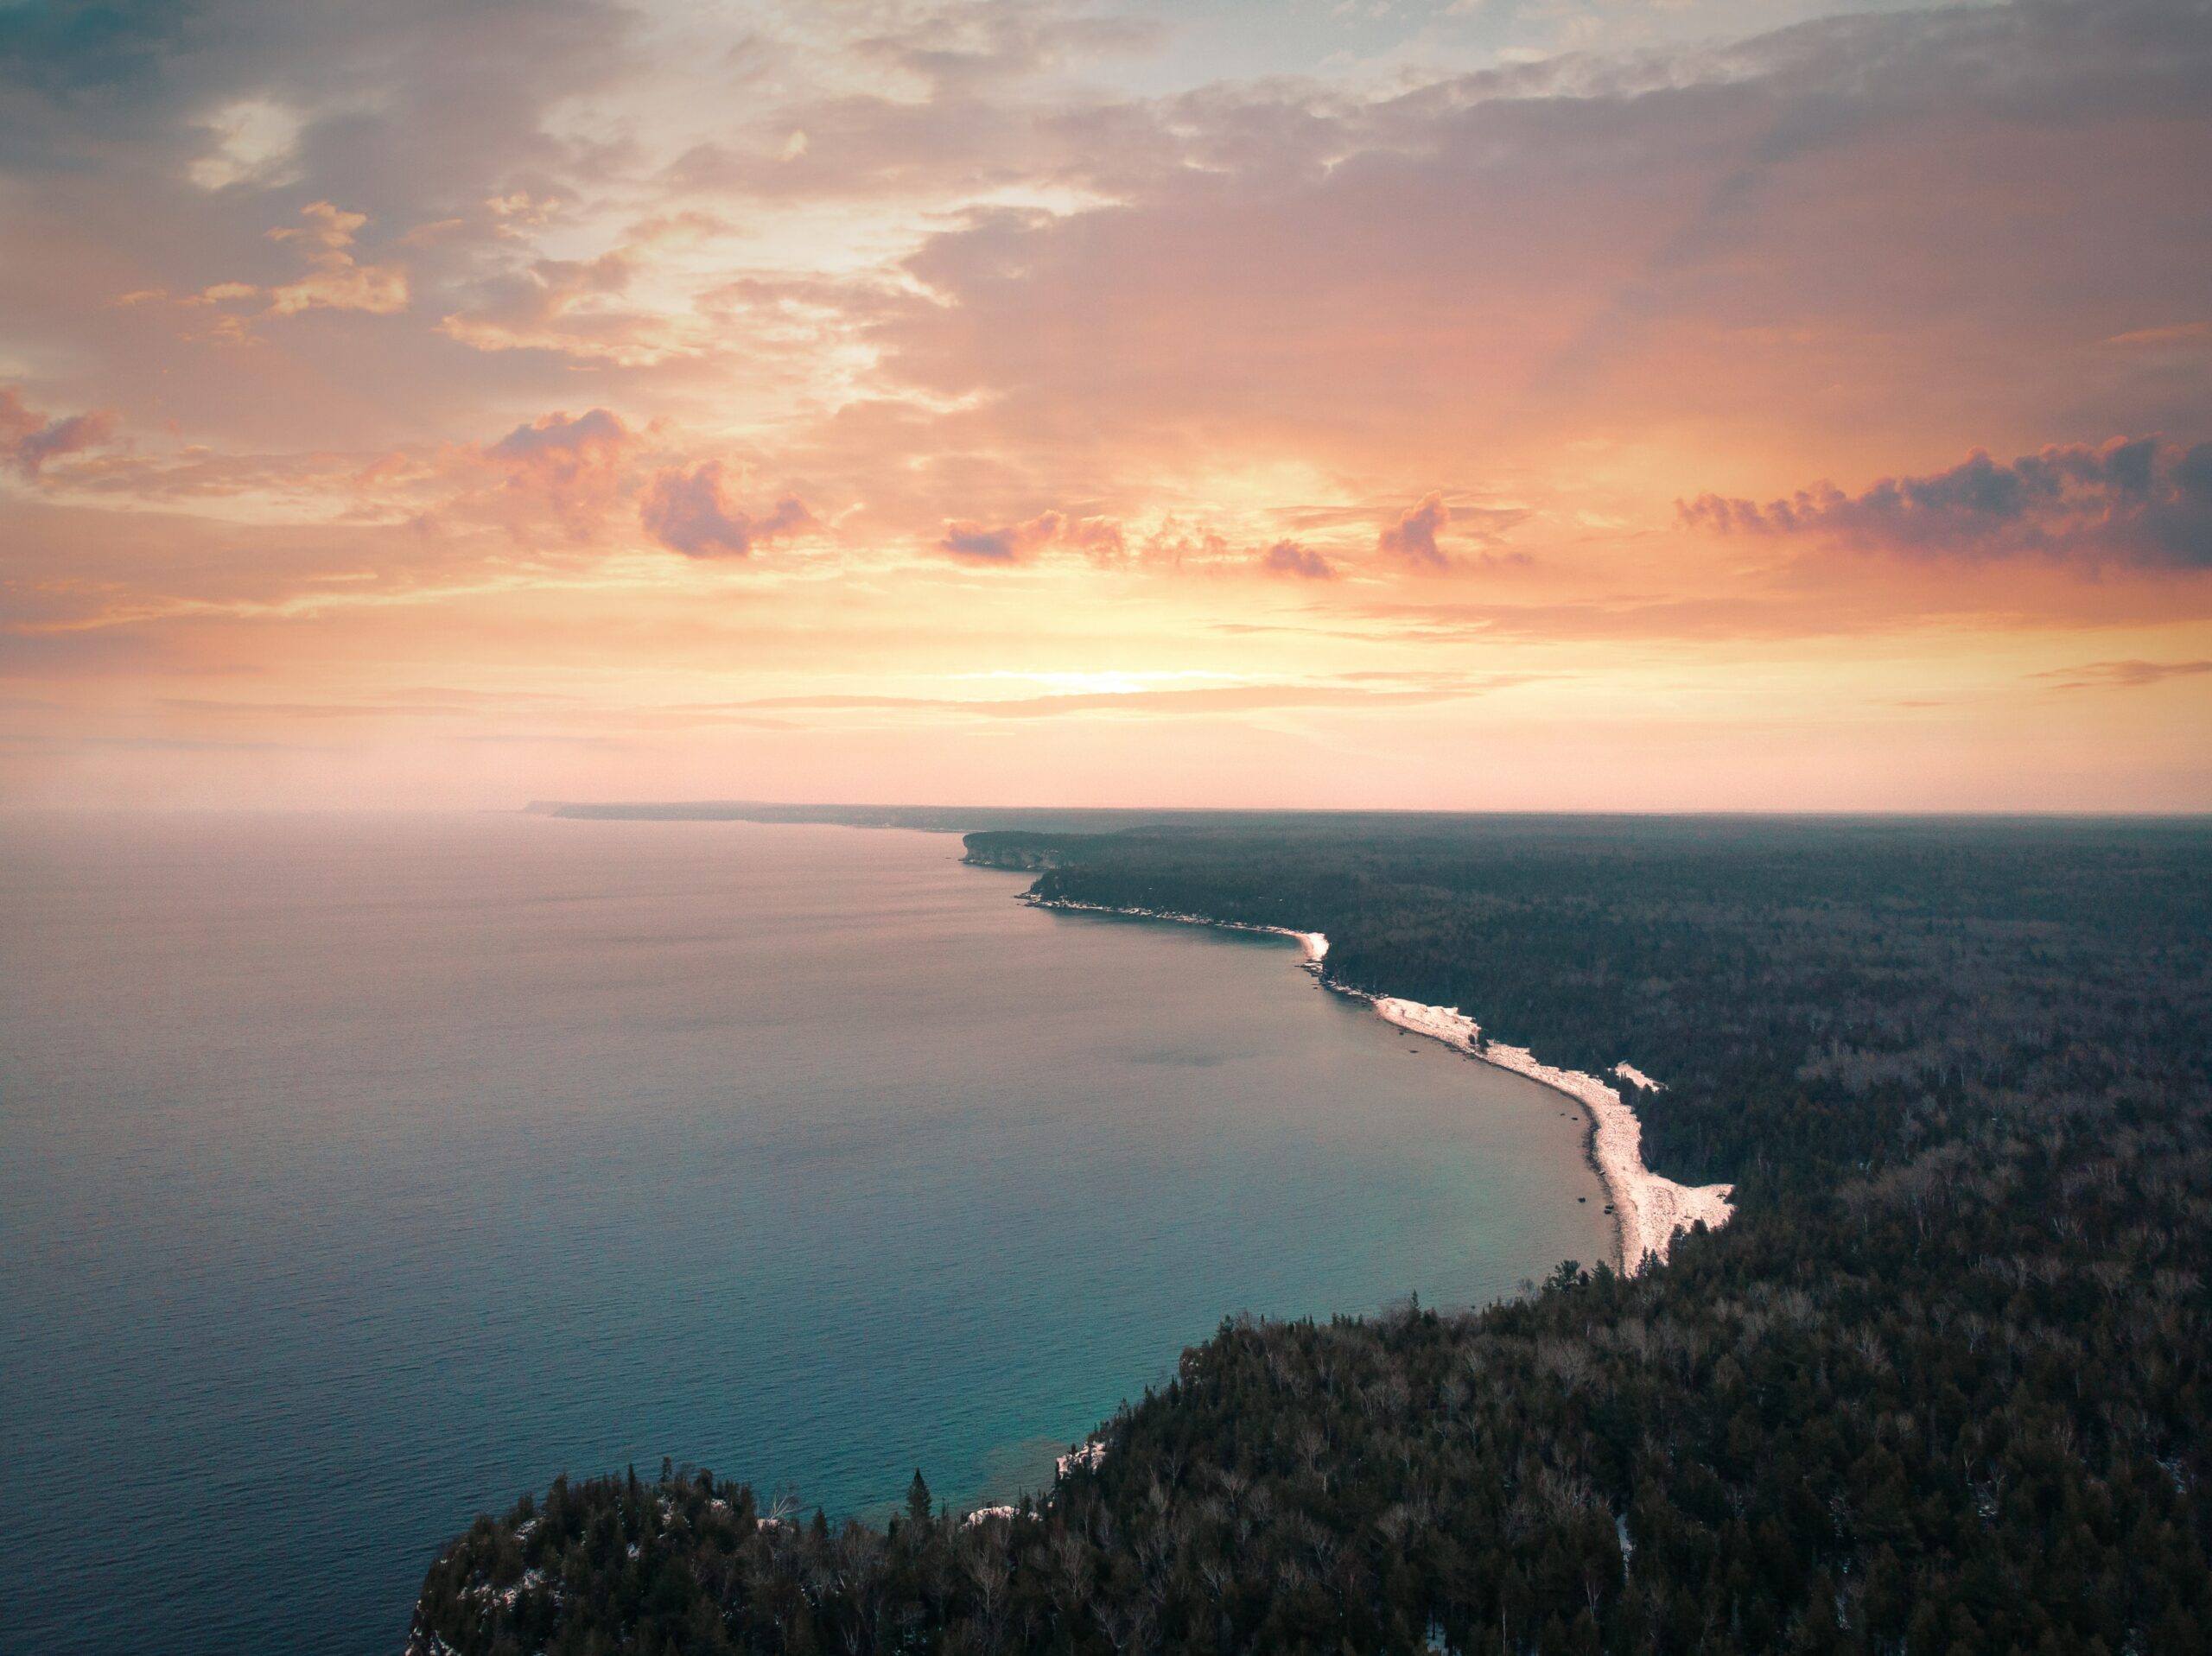 Ontario lake from above